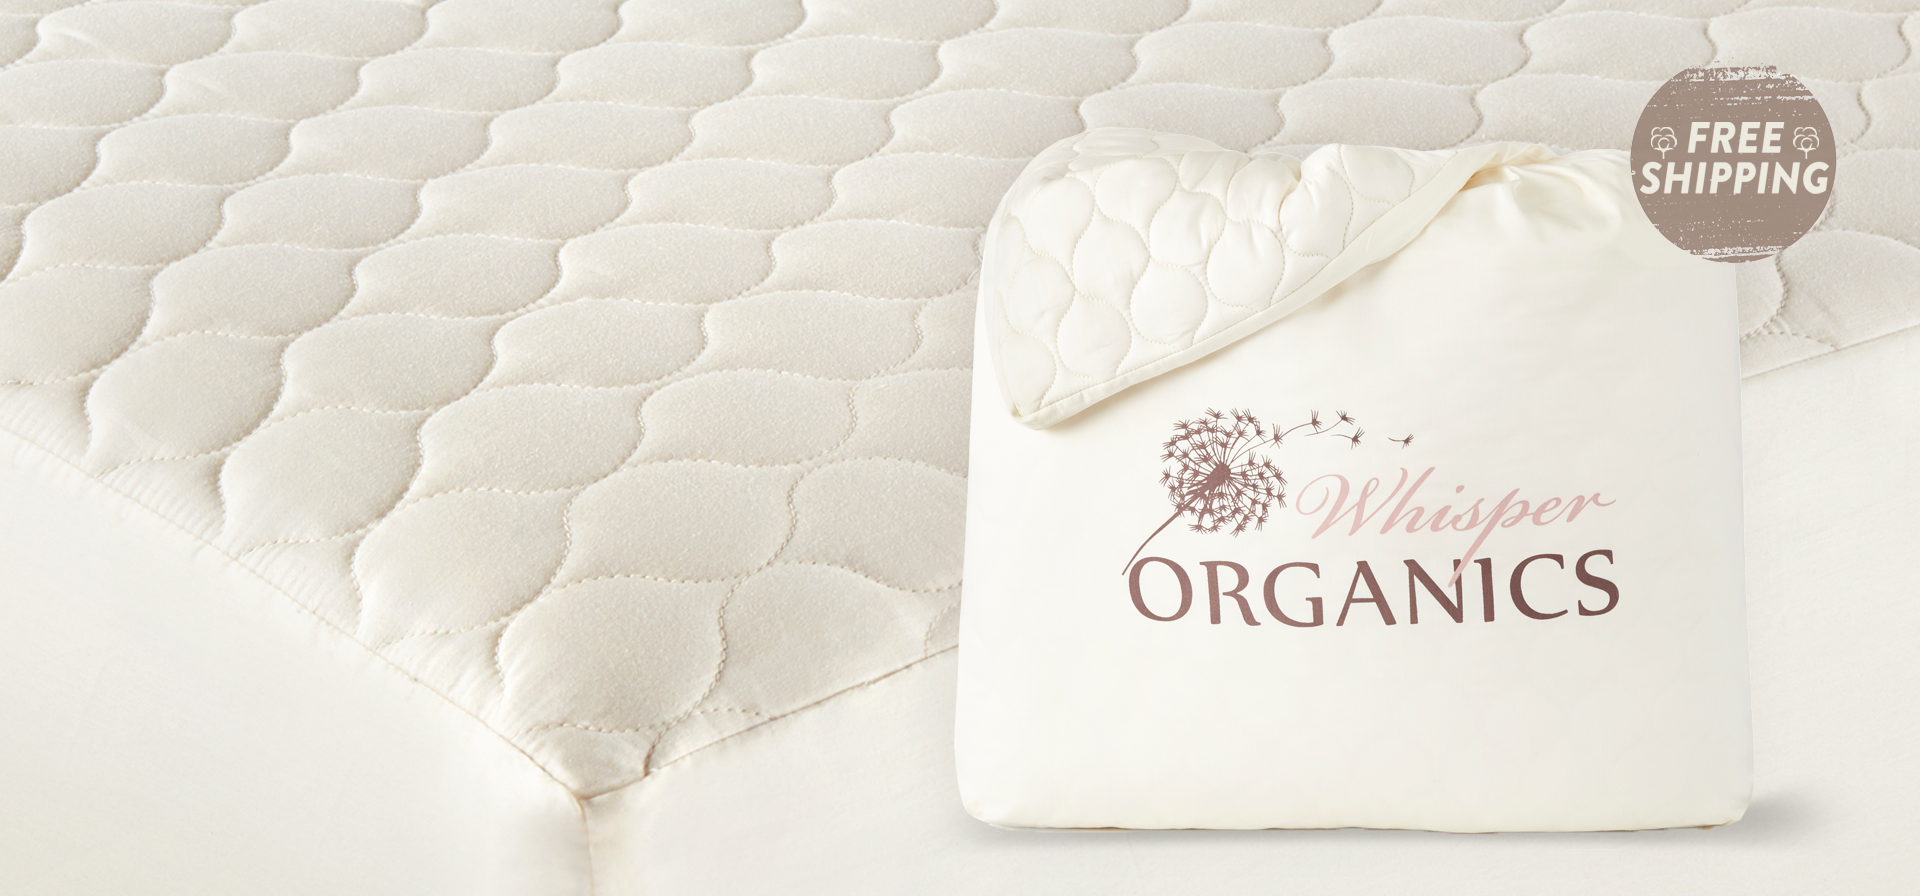 Whisper Organics, 100% Organic Cotton Mattress Protector - Breathable Cooling Quilted Fitted Mattress Pad Cover, GOTS Certified- Ivory Color, 17